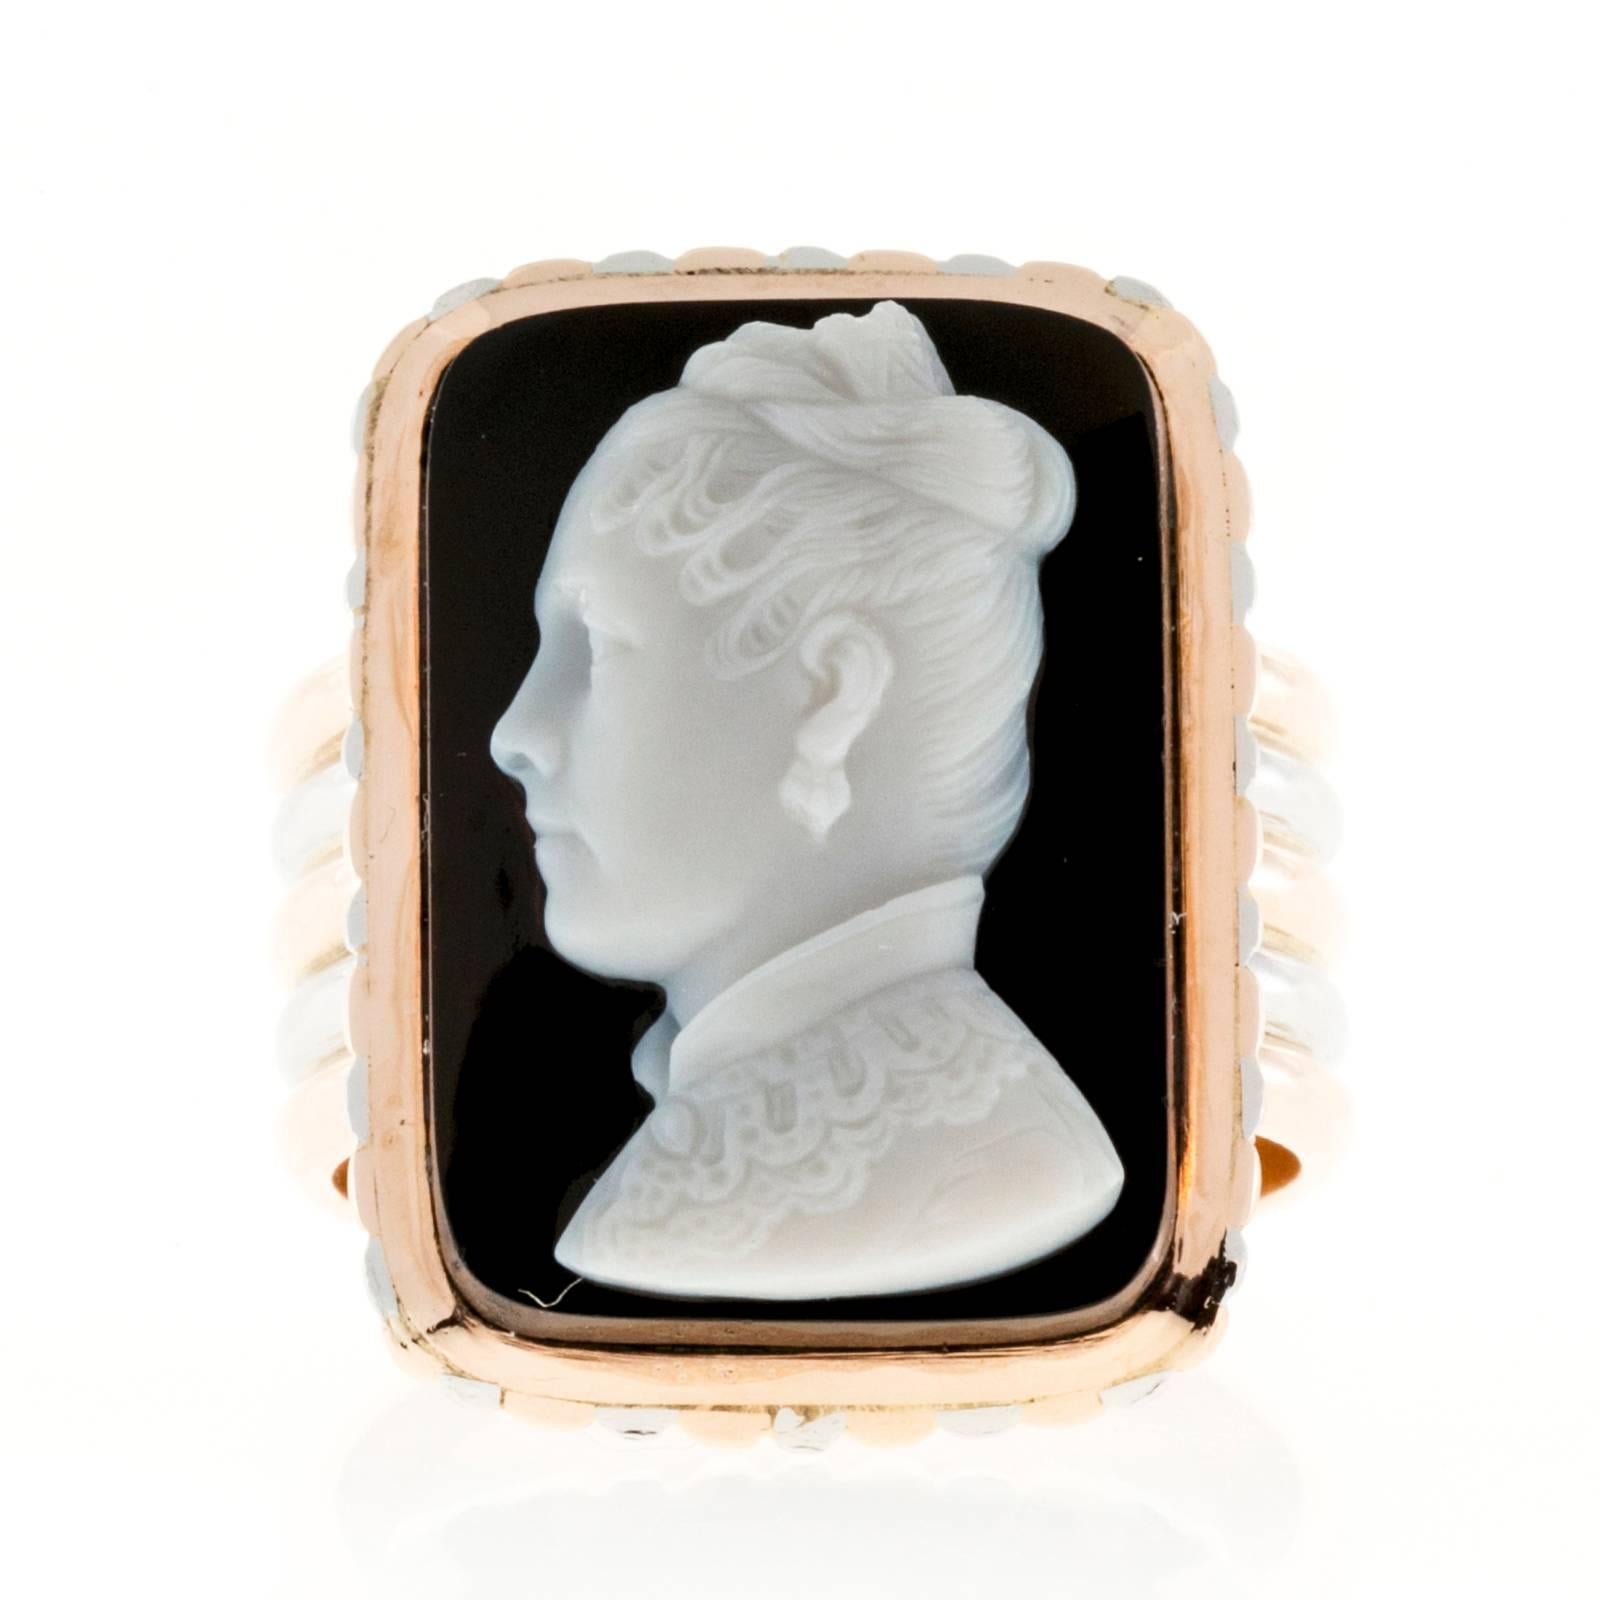 Victorian 1878 solid rose gold and platinum handmade cameo ring with and extra fine hardstone carving. 

Hardstone cameo 20.8 x 14.7mm, layered white and black
Platinum
14k Rose Gold
Tested: 14k pink gold and Platinum
Hand engraved AEH to WHC